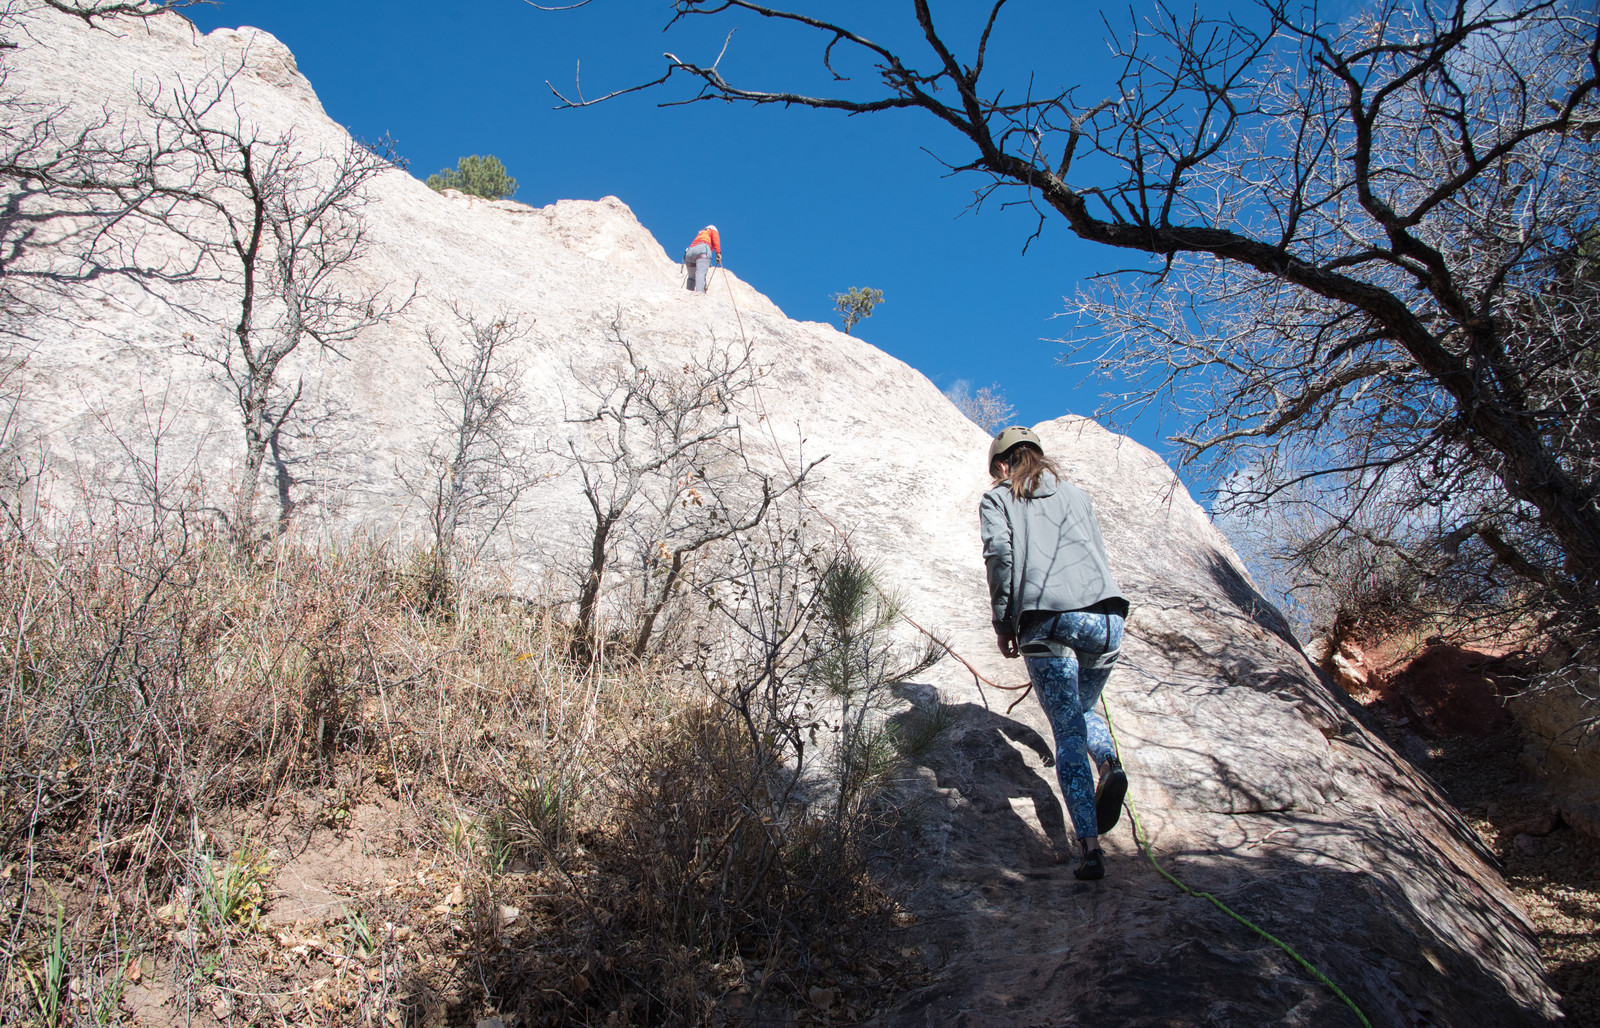 Mark Bryant's journalism class takes a trip outdoors with the Outdoor Recreation Center to Garden of the Gods. Here the students get a small taste of what it's like to climb. Photograph courtesy of Joshua Birndorf.